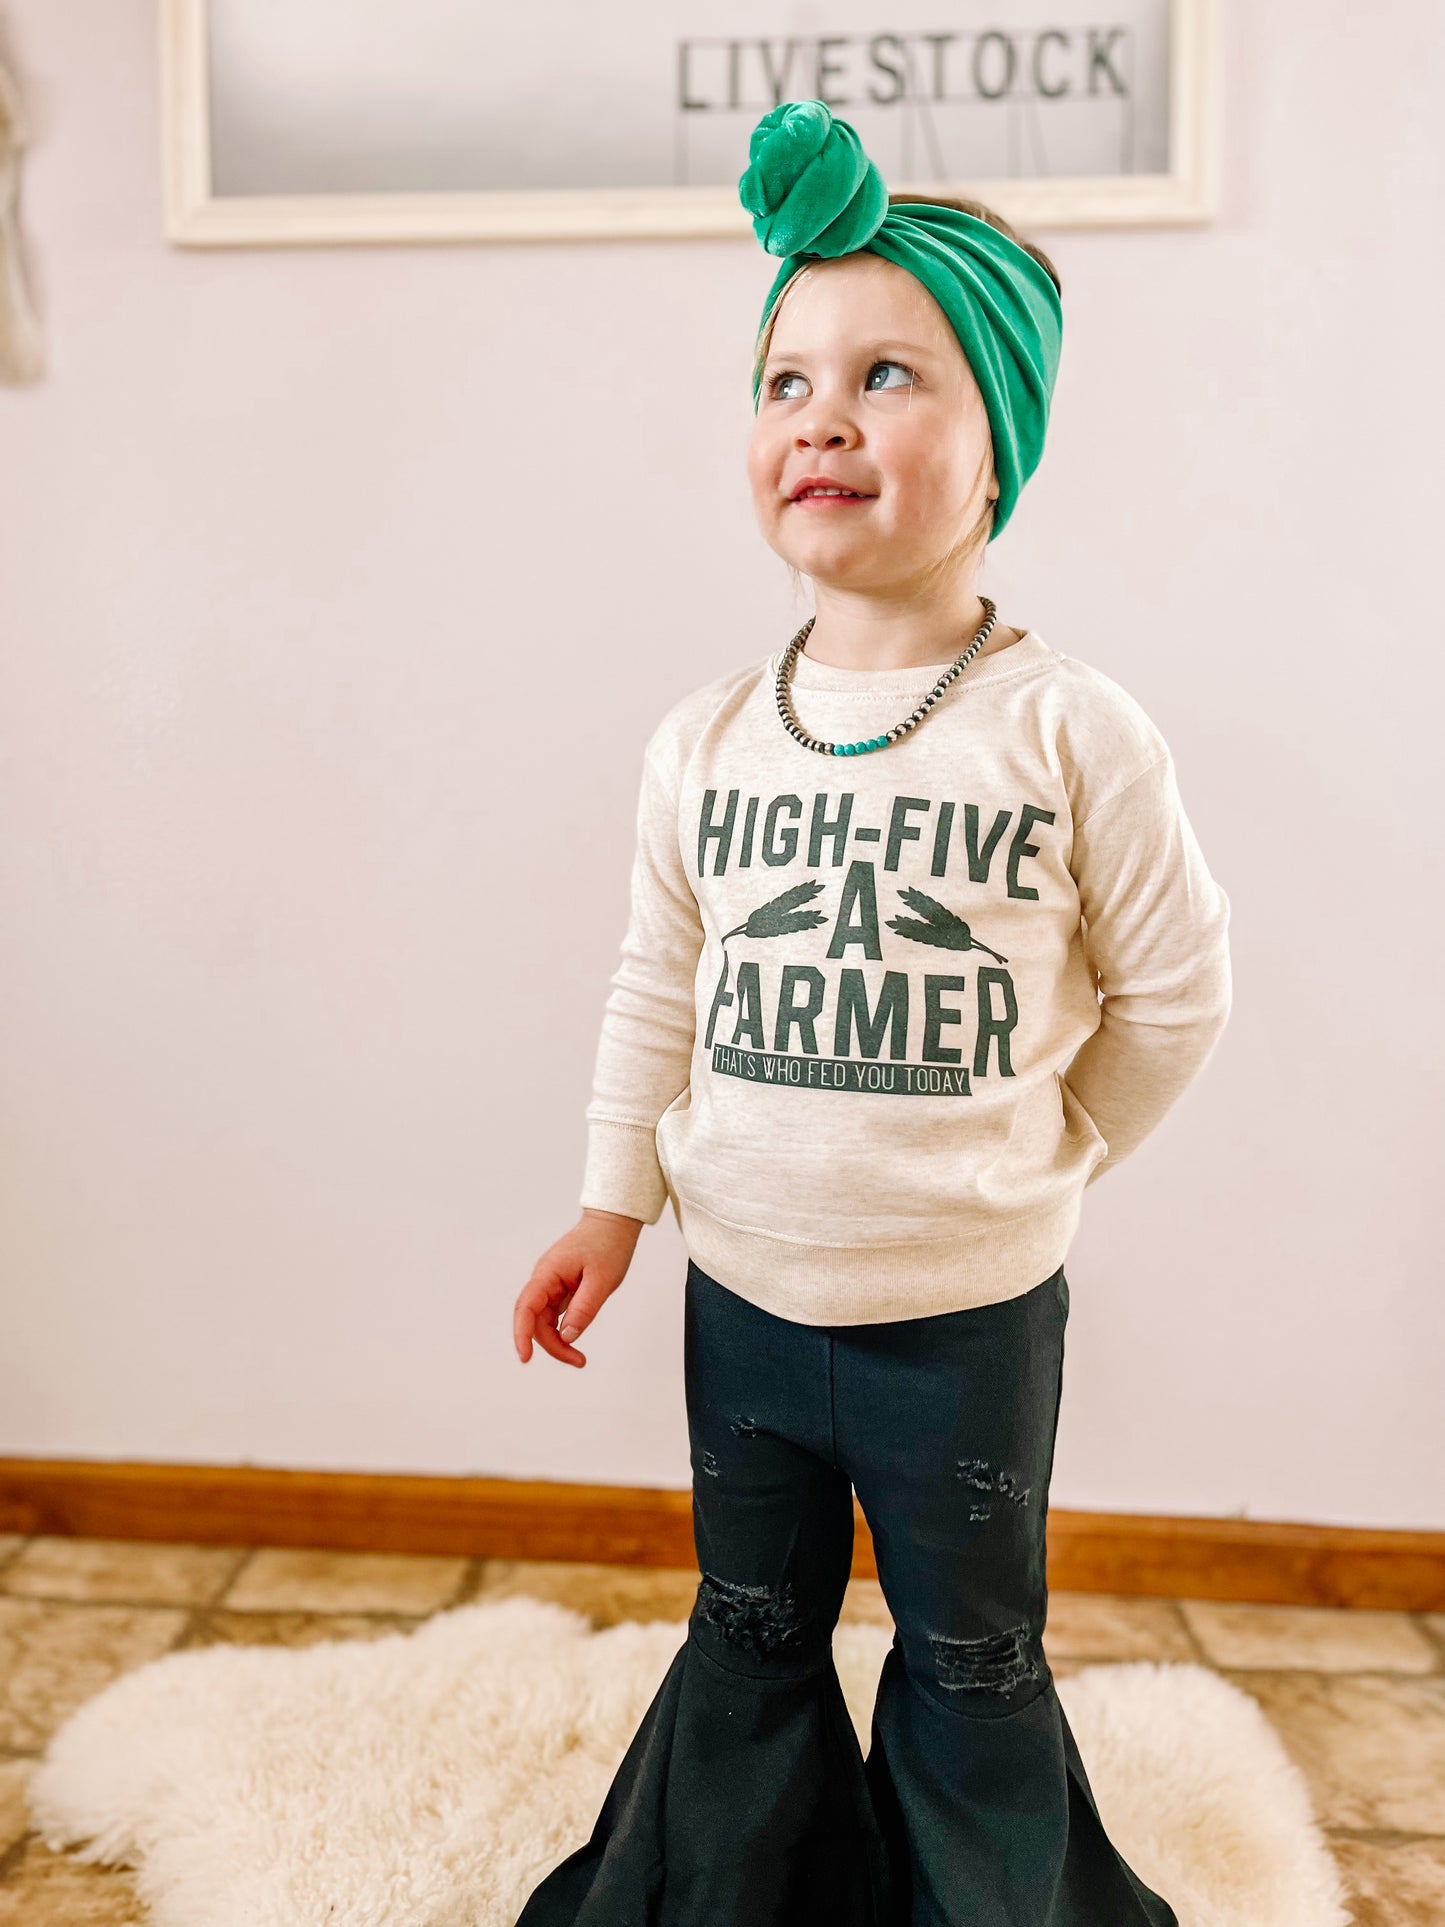 the High Five a |Farmer| That's Who Fed You Today onesie + tee